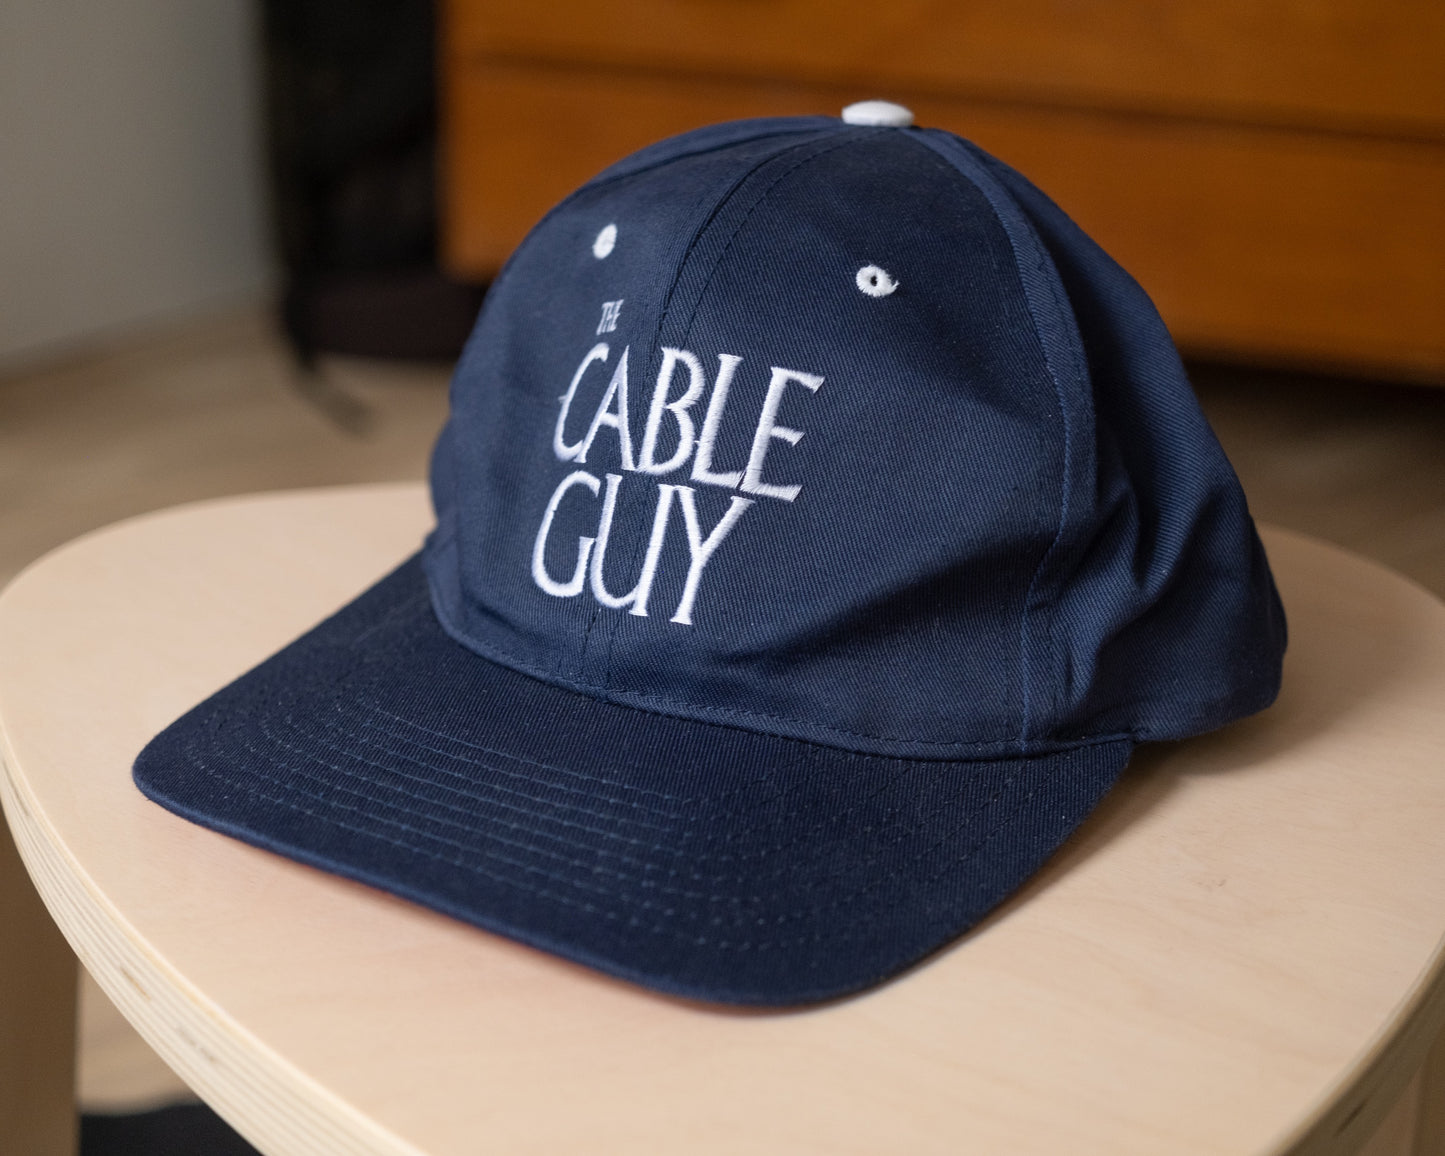 The Cable Guy Movie Vintage Snapback Hat